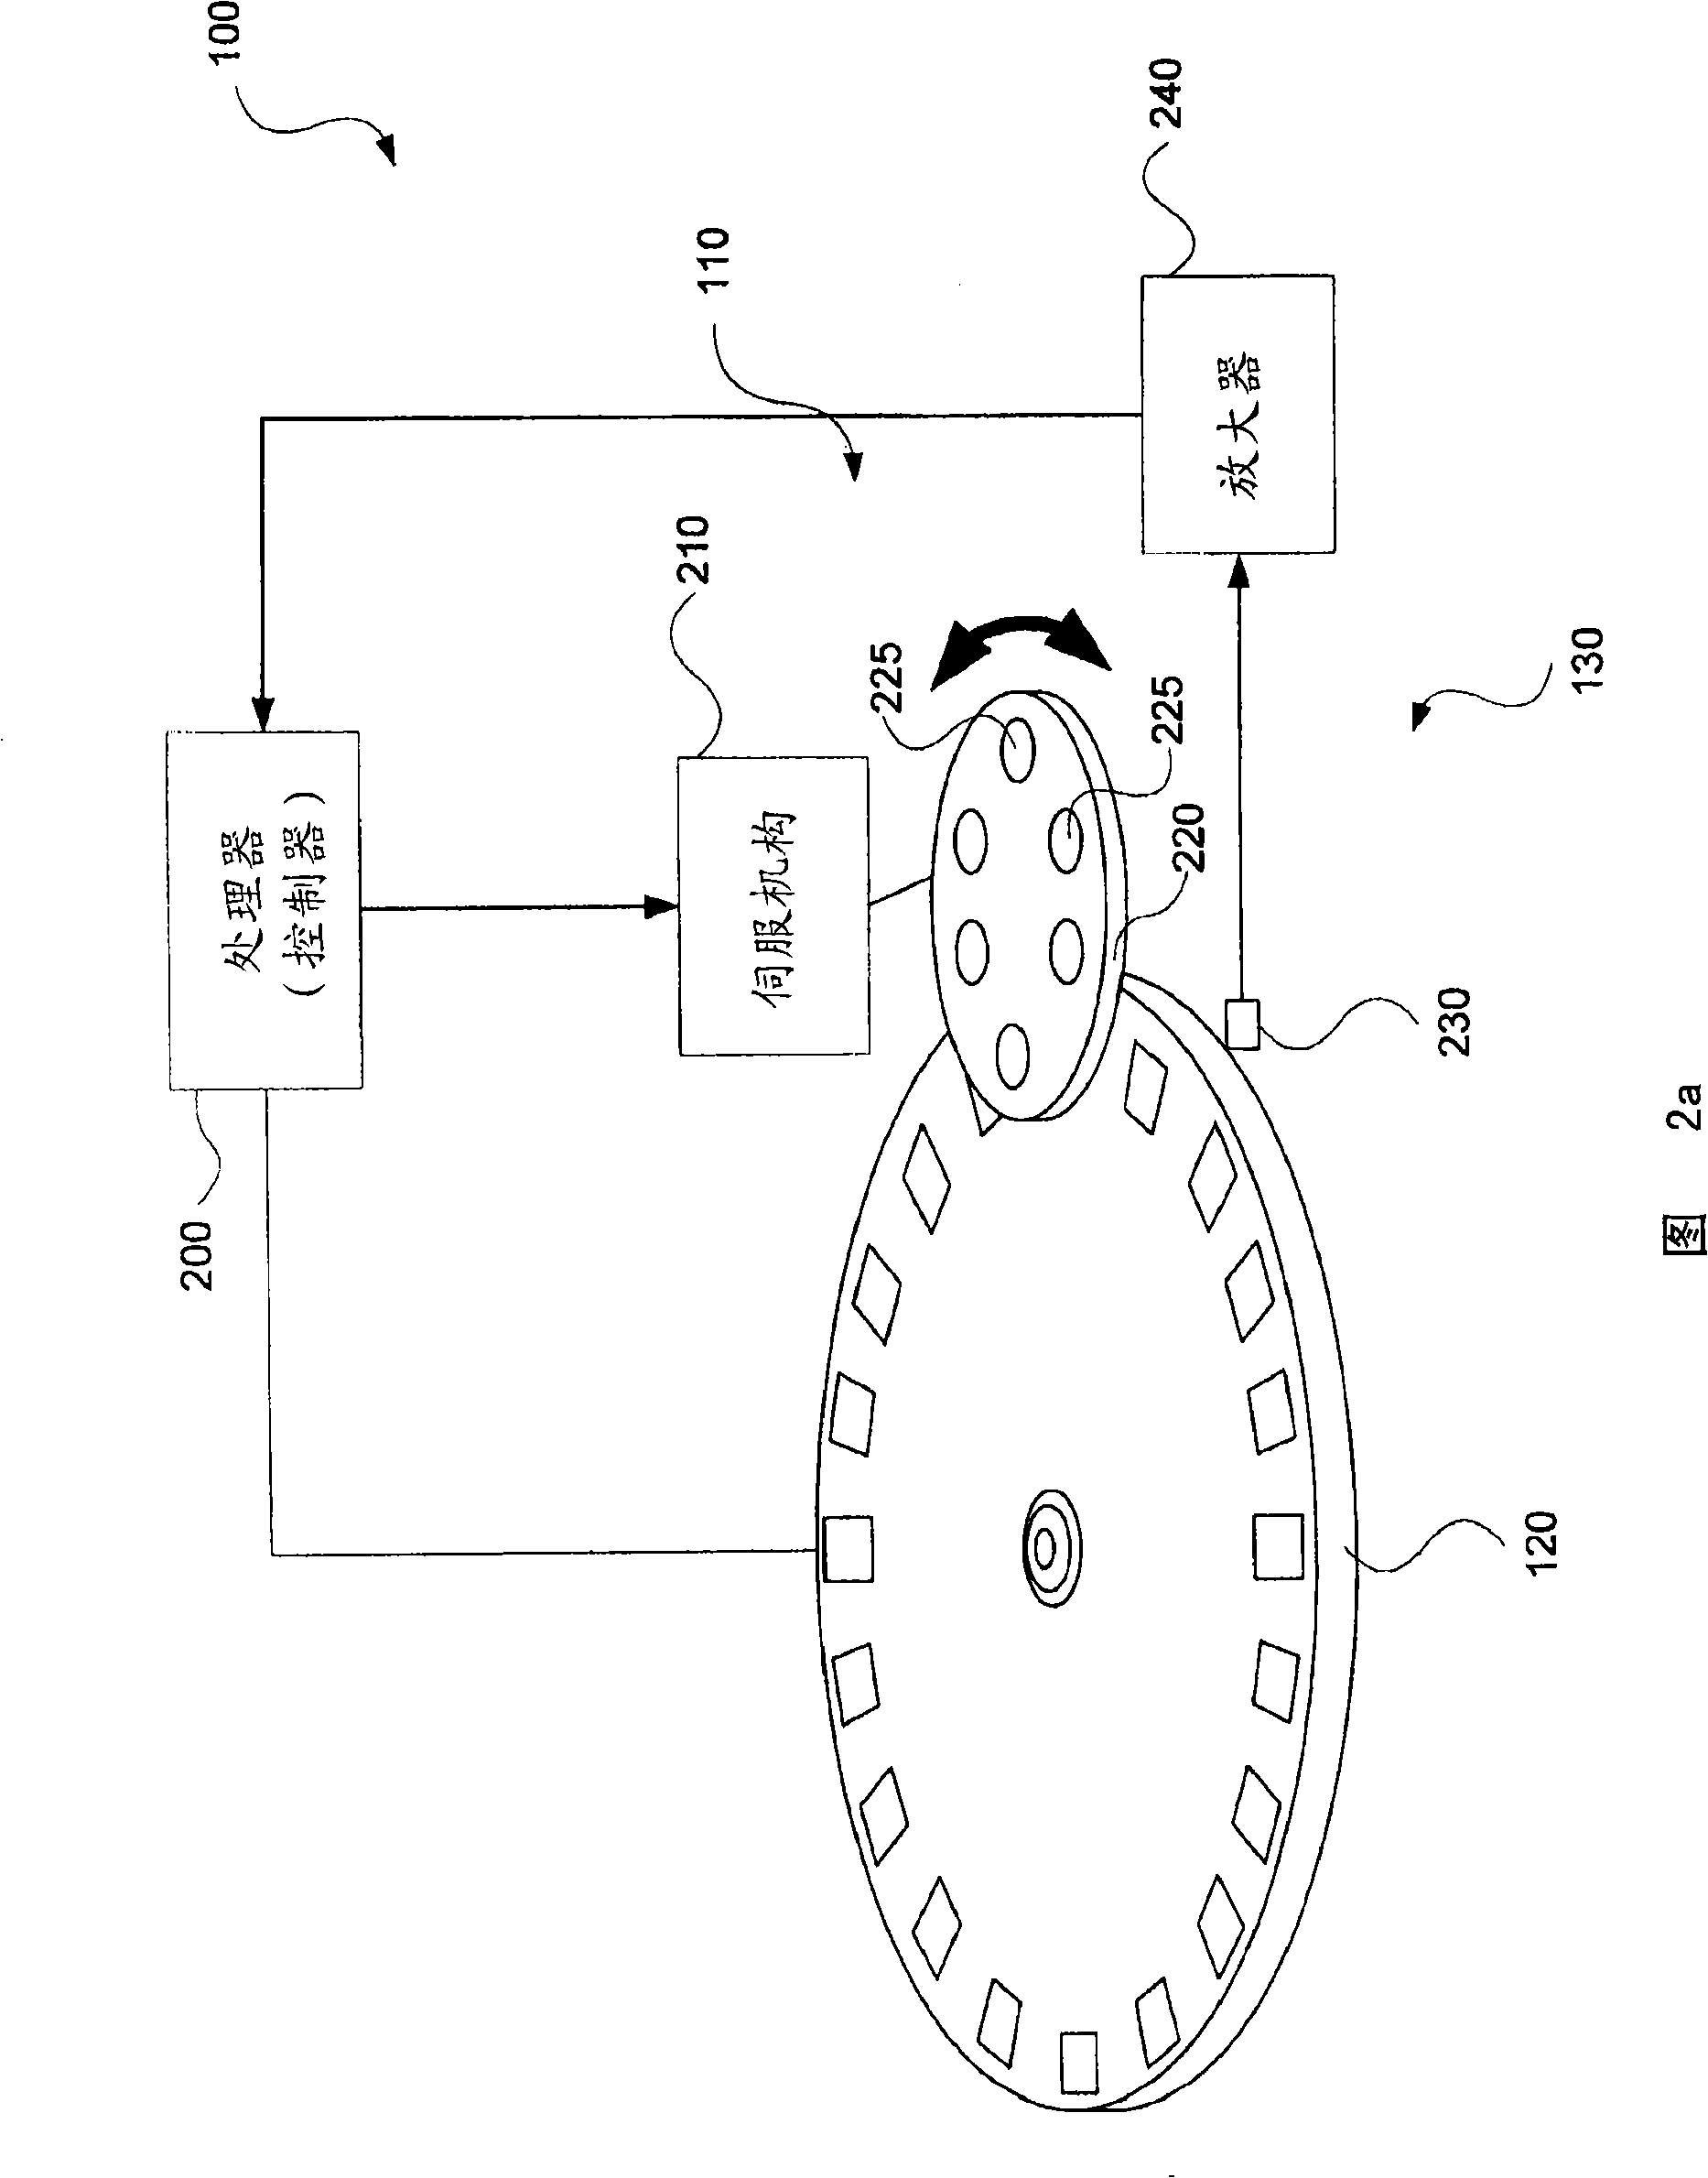 System for optically analyzing a substance